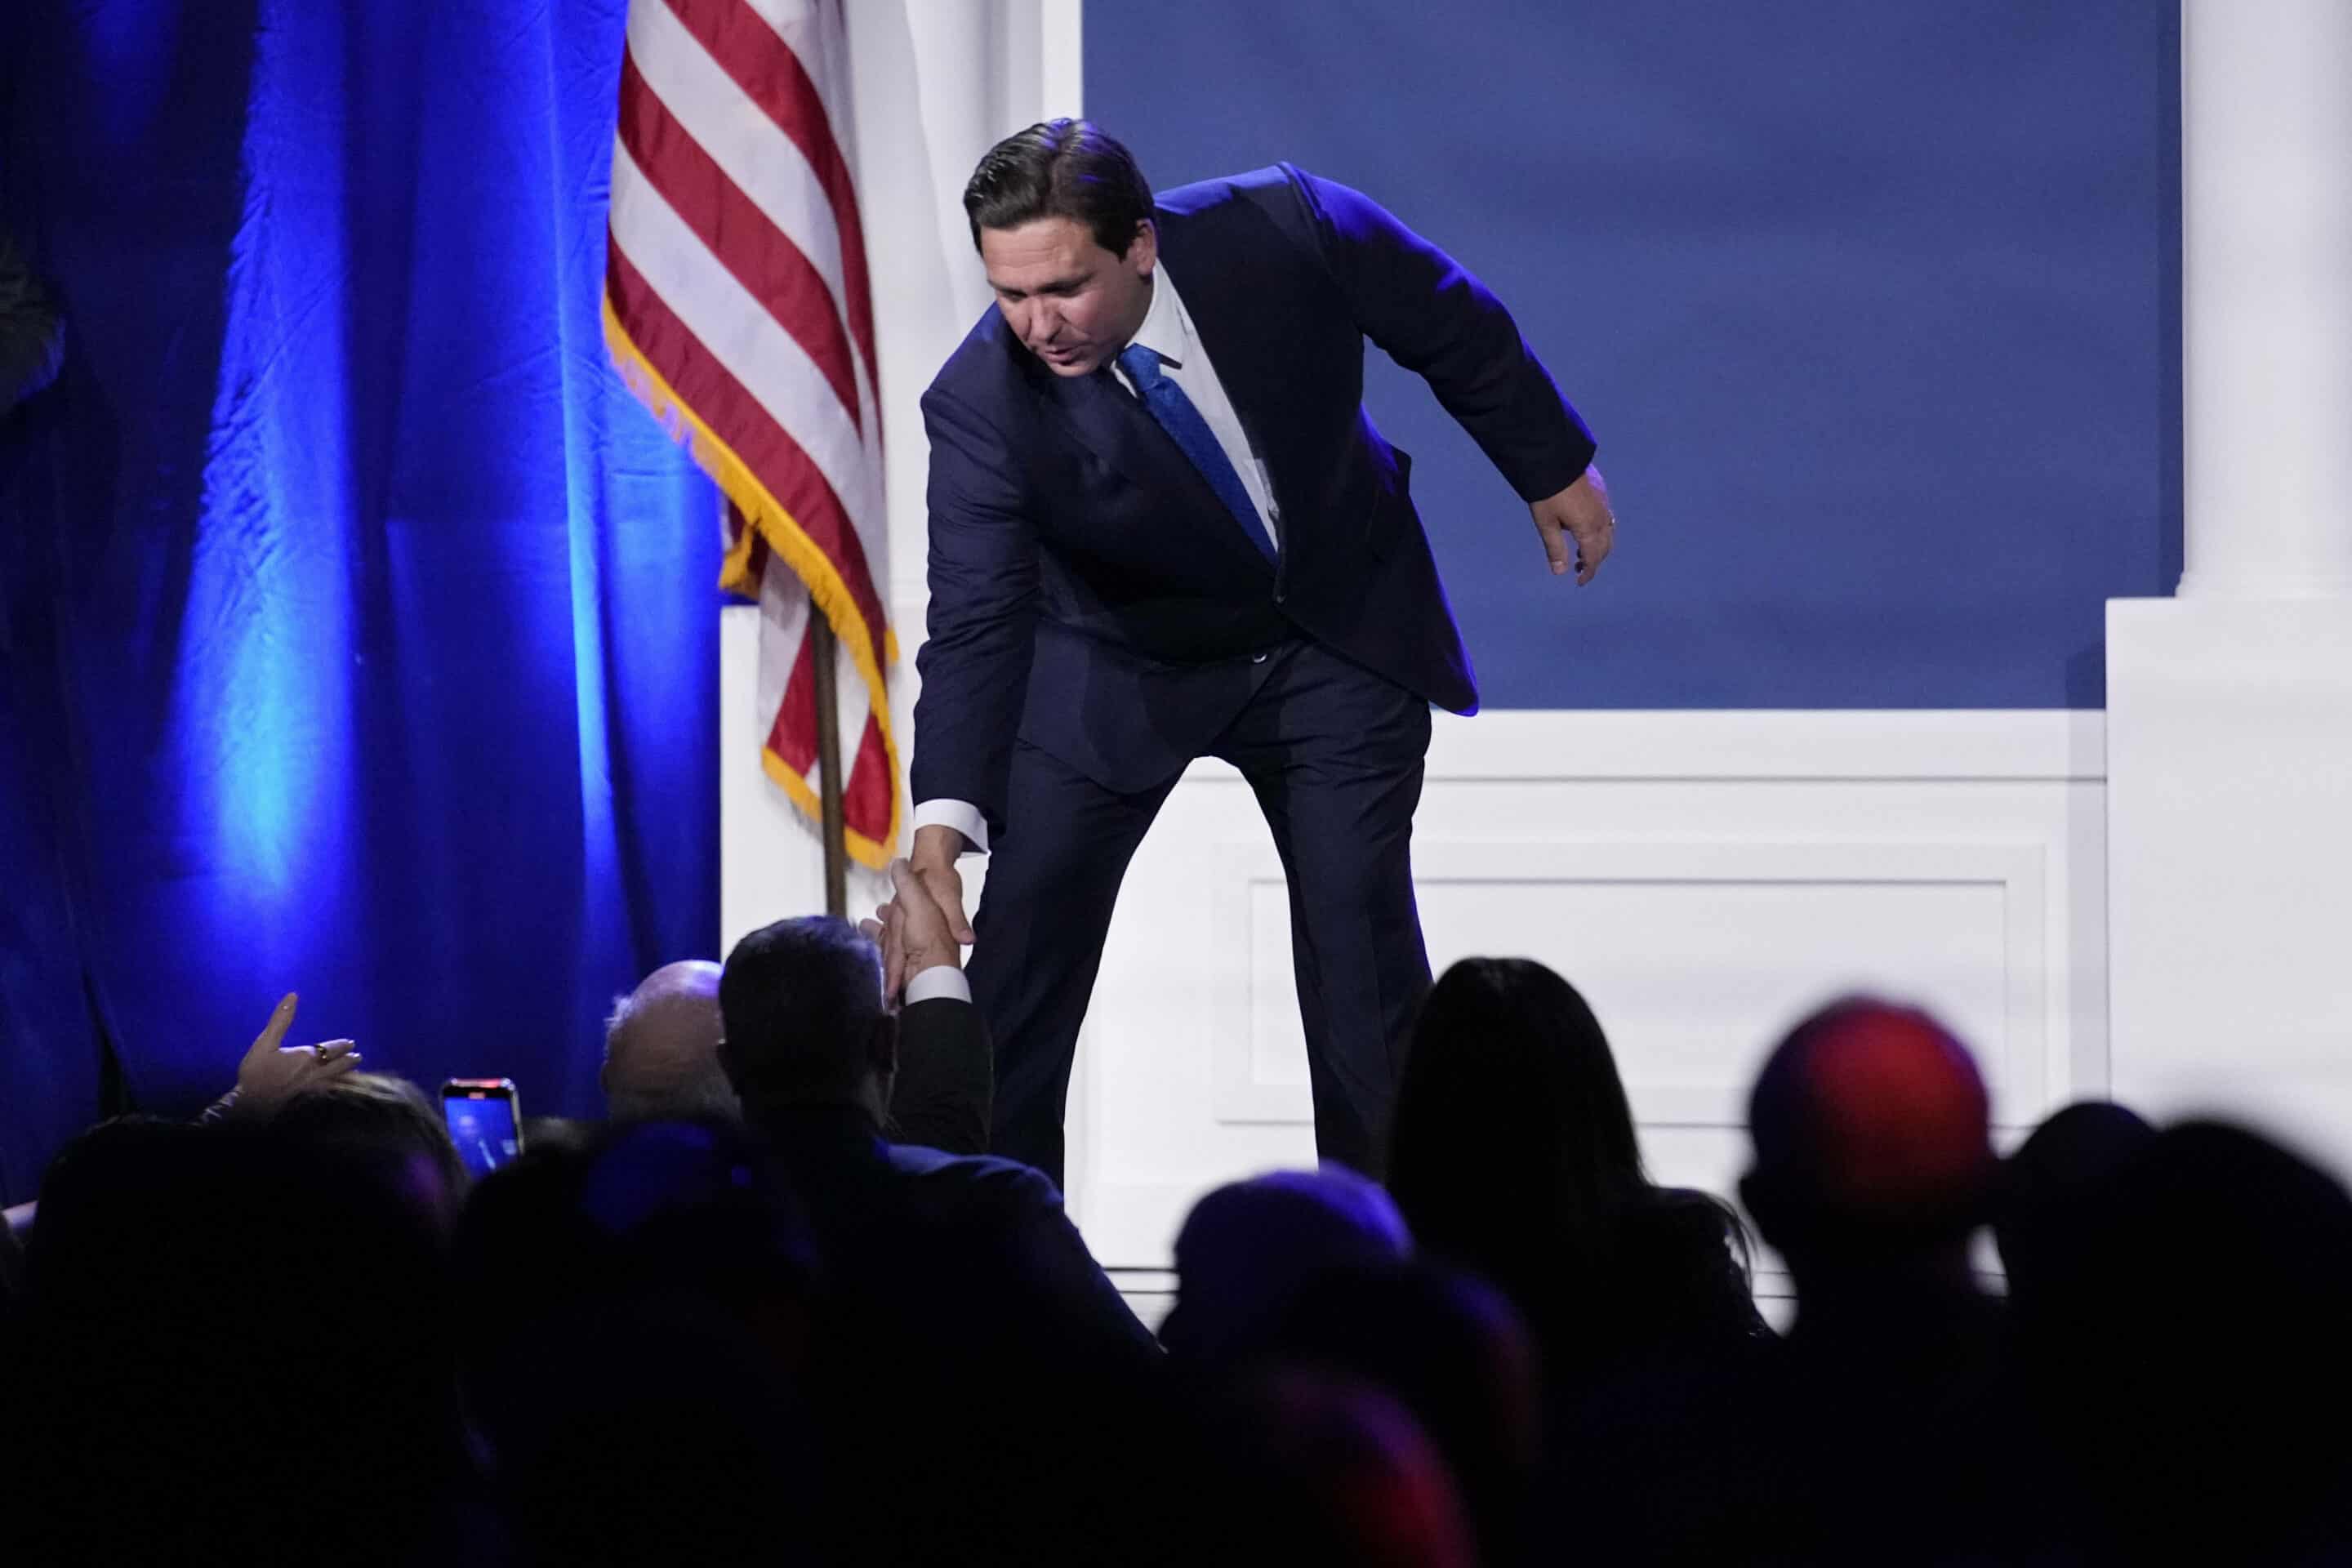 Florida Gov. Ron DeSantis shakes hands with people after speaking at an annual leadership meeting of the Republican Jewish Coalition Saturday, Nov. 19, 2022, in Las Vegas. (AP Photo/John Locher)/NVJL157/22324198039702//2211200640